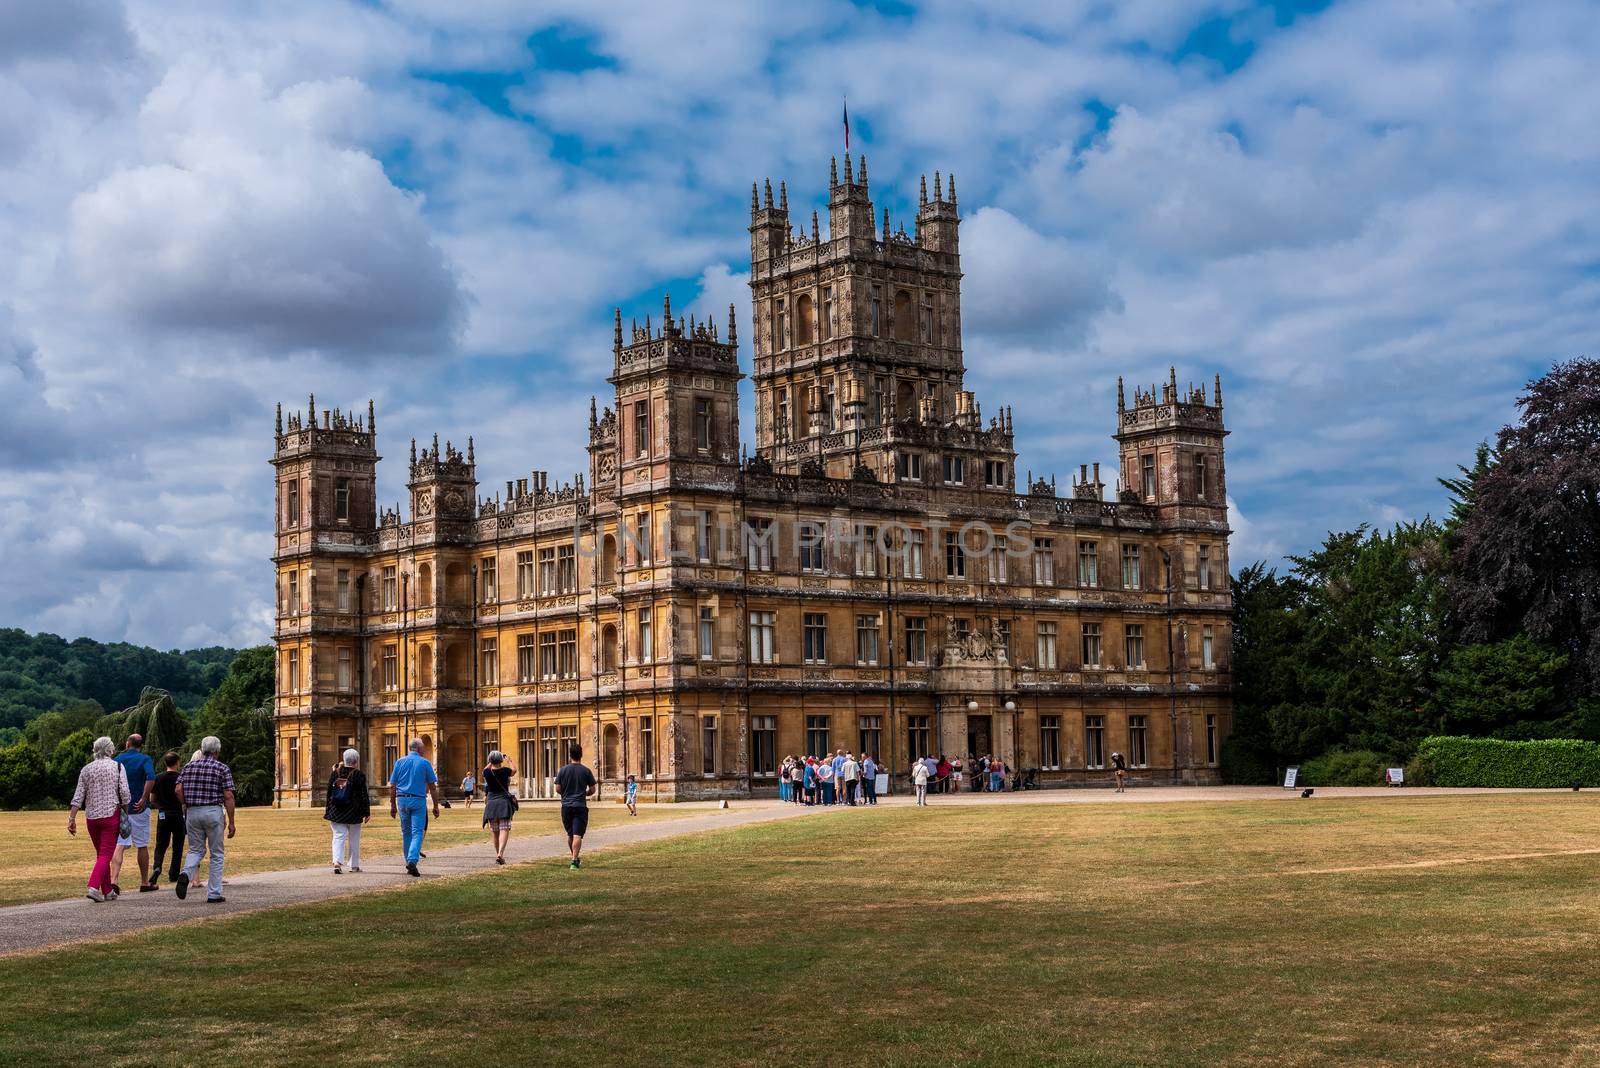 Tour Groups Visiting Highclere Castle by jfbenning